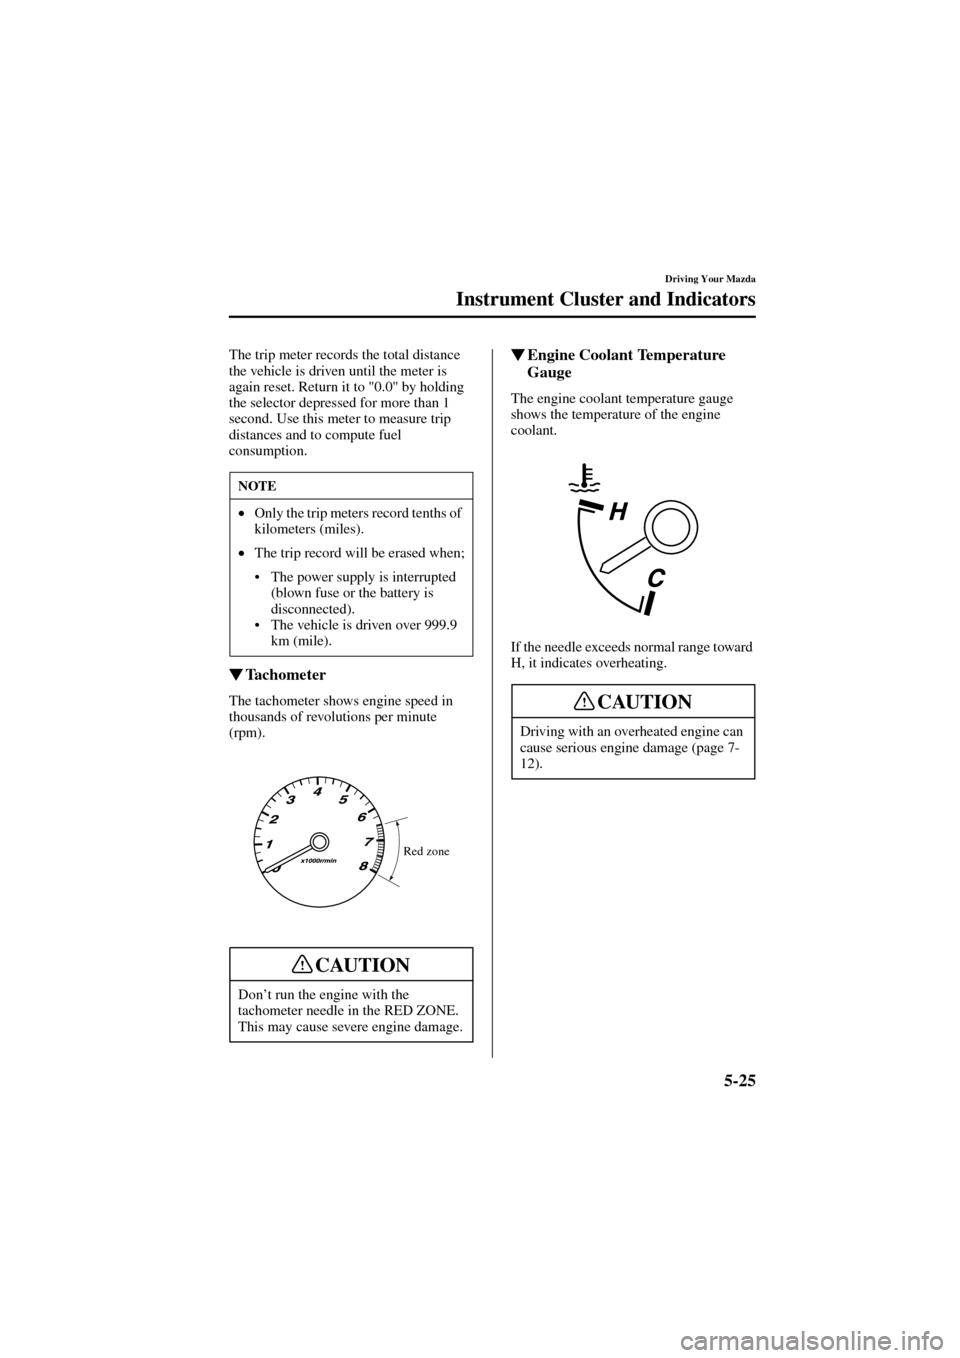 MAZDA MODEL 6 2004  Owners Manual (in English) 5-25
Driving Your Mazda
Instrument Cluster and Indicators
Form No. 8R29-EA-02I
The trip meter records the total distance 
the vehicle is driven until the meter is 
again reset. Return it to "0.0" by h